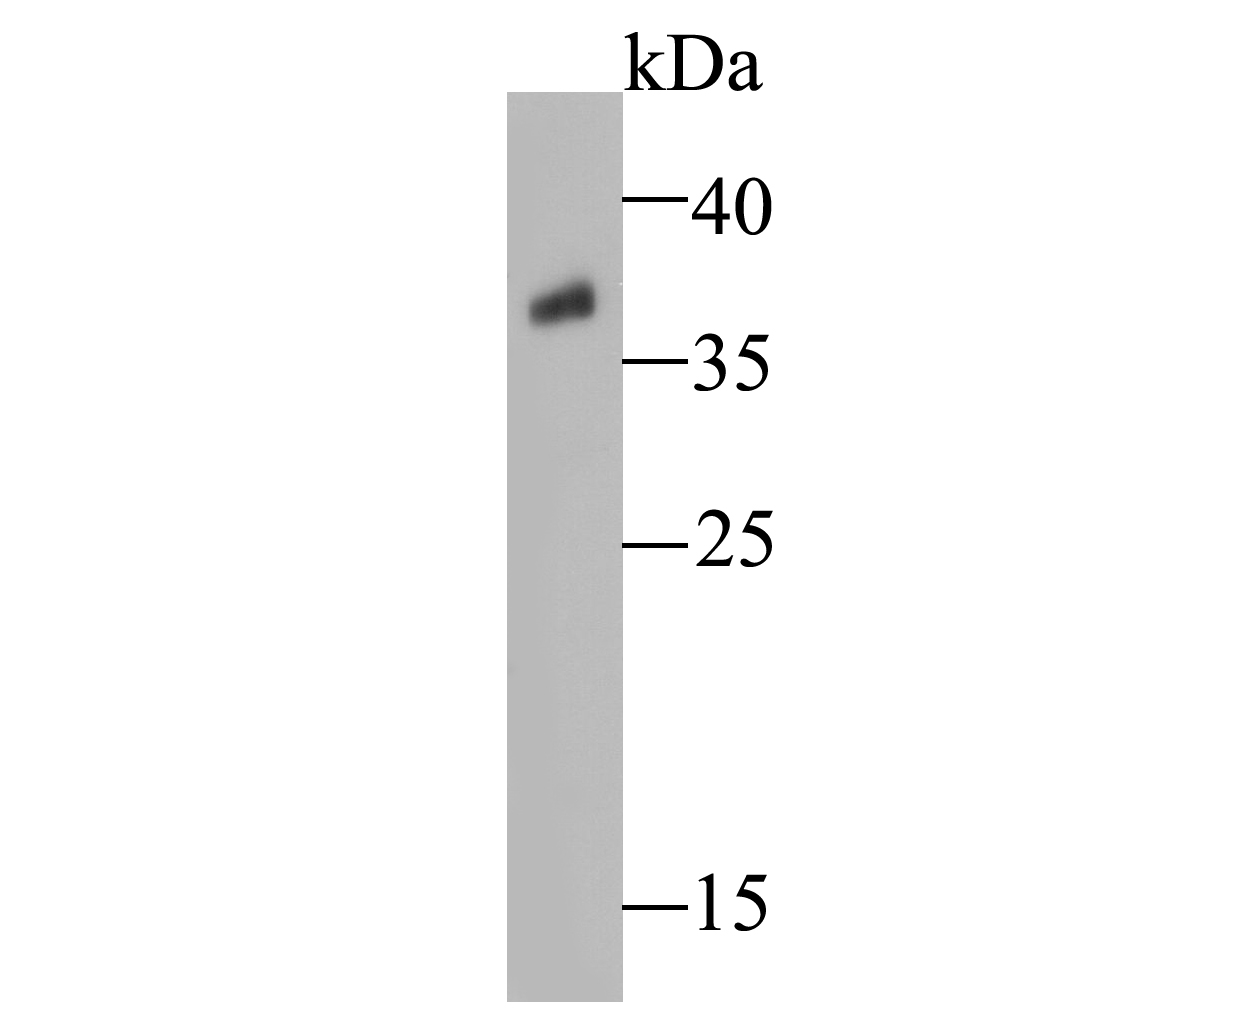 Western blot analysis of Rice Os01g0847700 protein on rice stem lysates. Proteins were transferred to a PVDF membrane and blocked with 5% BSA in PBS for 1 hour at room temperature. The primary antibody (ER1901-09, 1/500) was used in 5% BSA at room temperature for 2 hours. Goat Anti-Rabbit IgG - HRP Secondary Antibody (HA1001) at 1:5,000 dilution was used for 1 hour at room temperature.